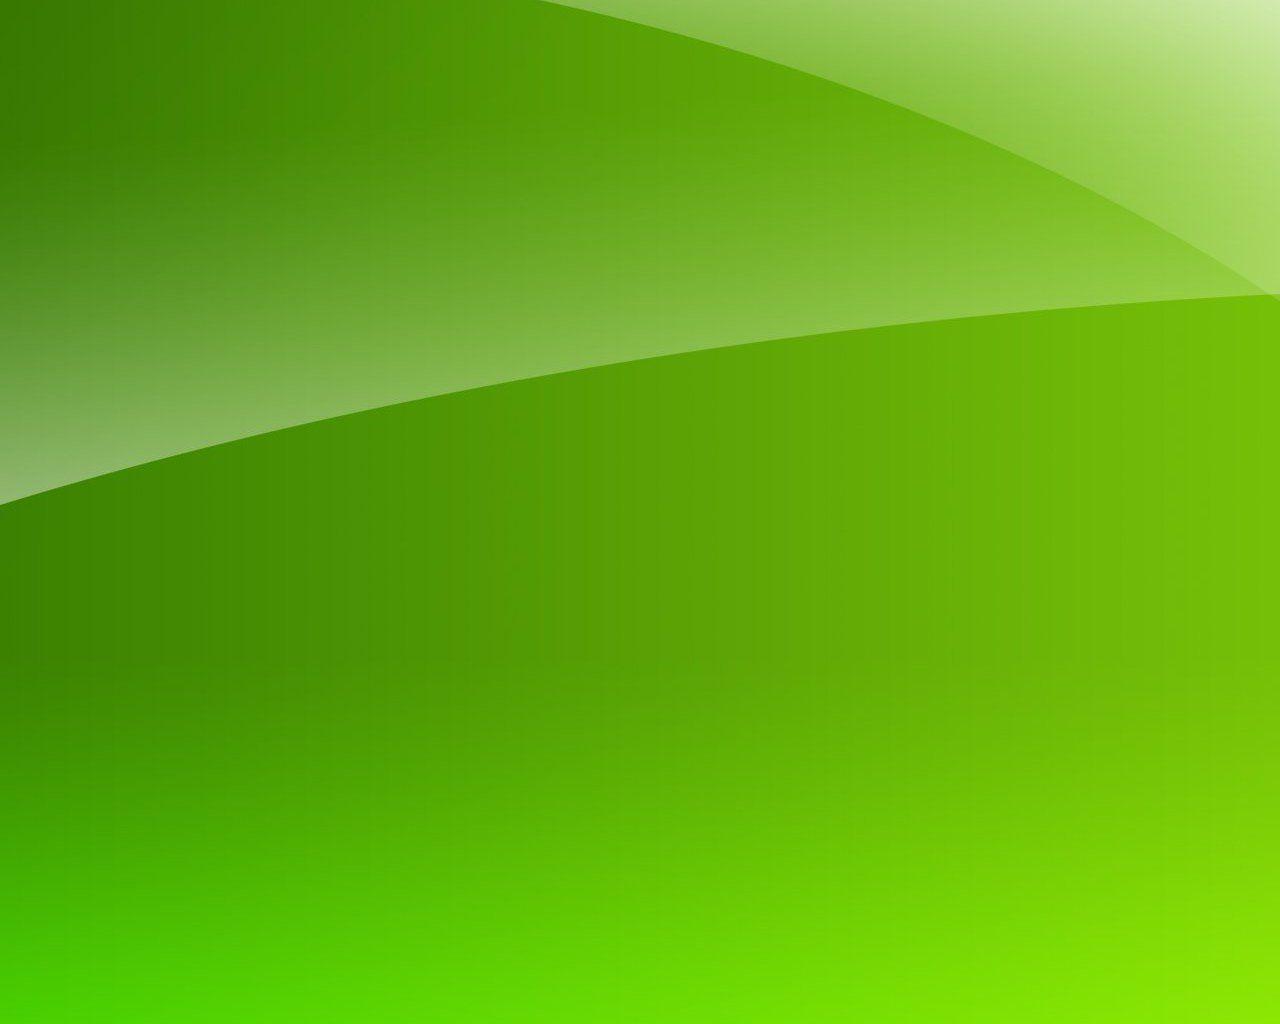 HD wallpaper Minimalism Simple Abstract Green Background  Wallpaper  Flare